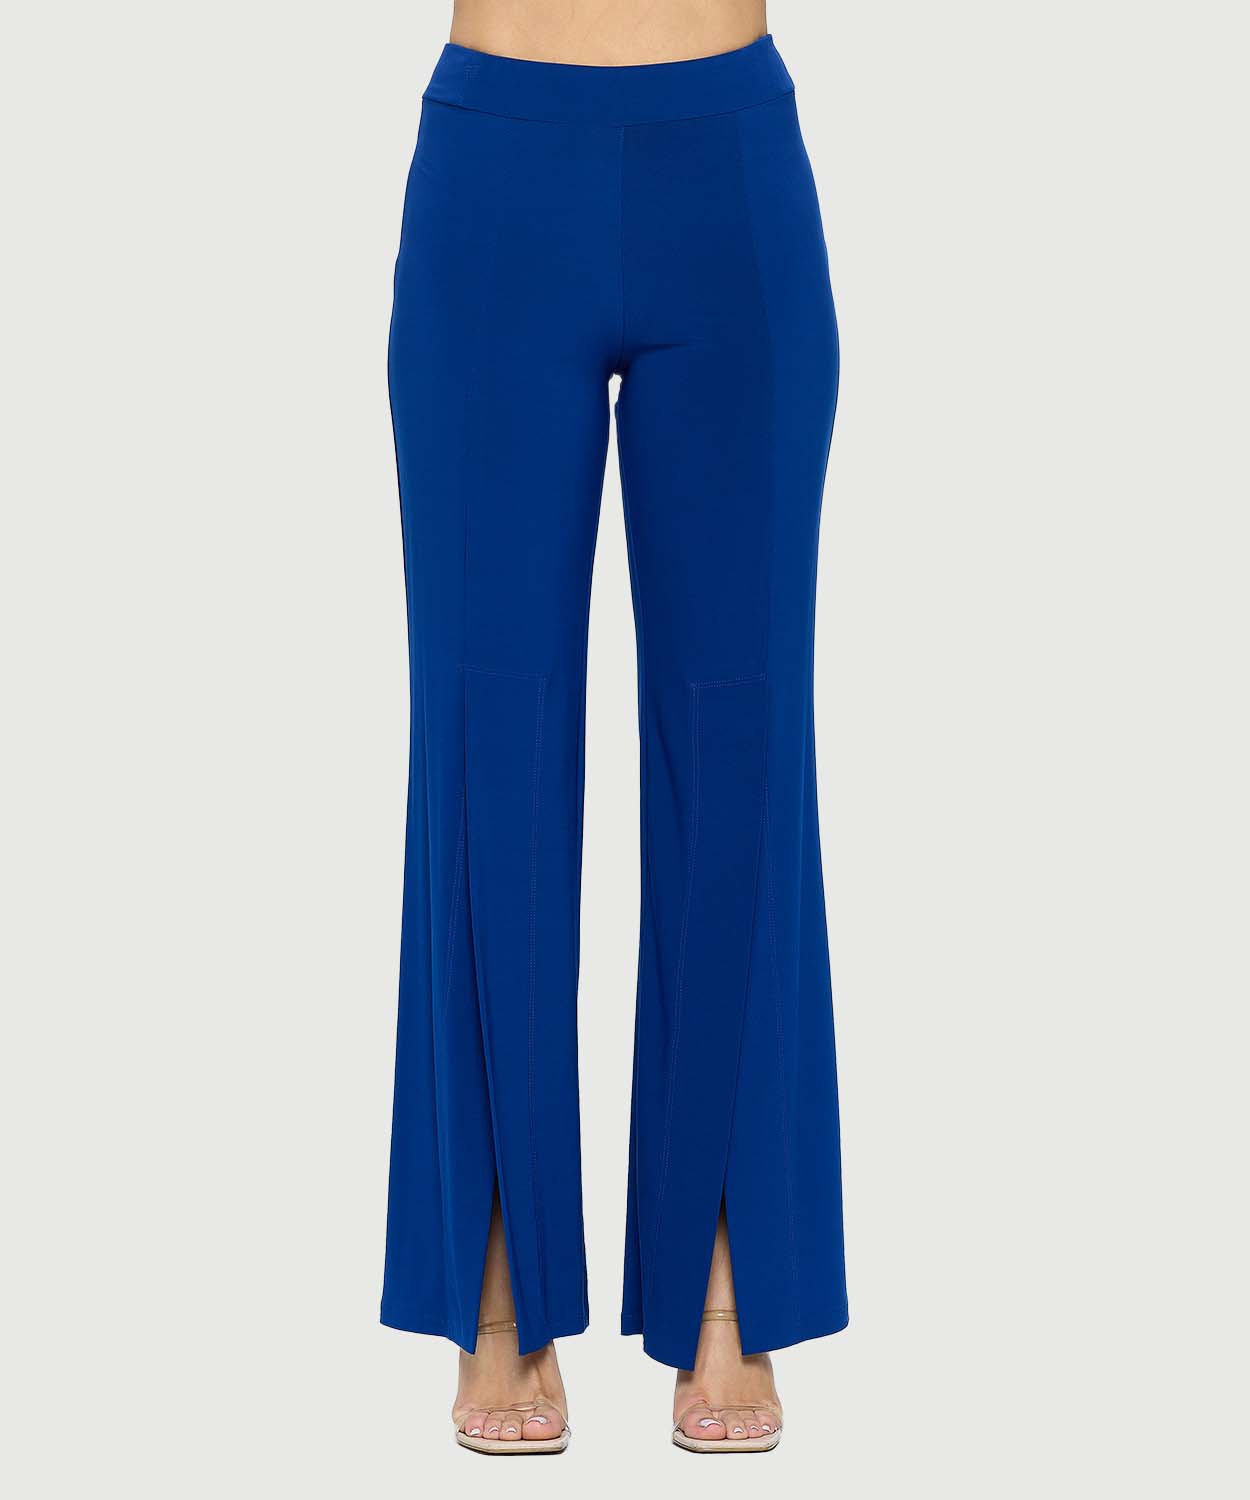 Wide Leg Pants with Side Slit and Elastic Waistband - Blue